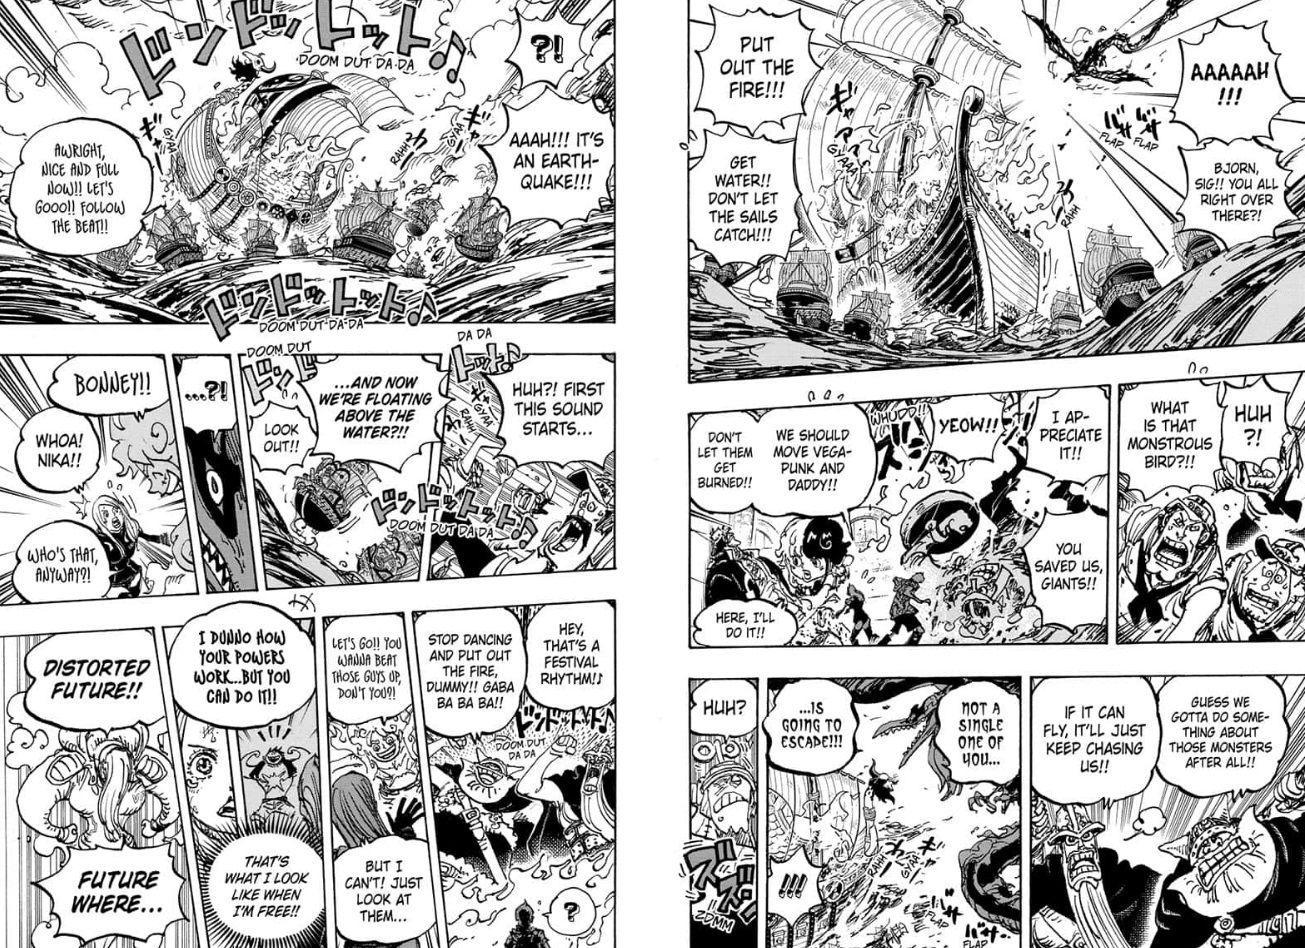 One Piece, chapter 1118, where Mars attacks the giant ships.